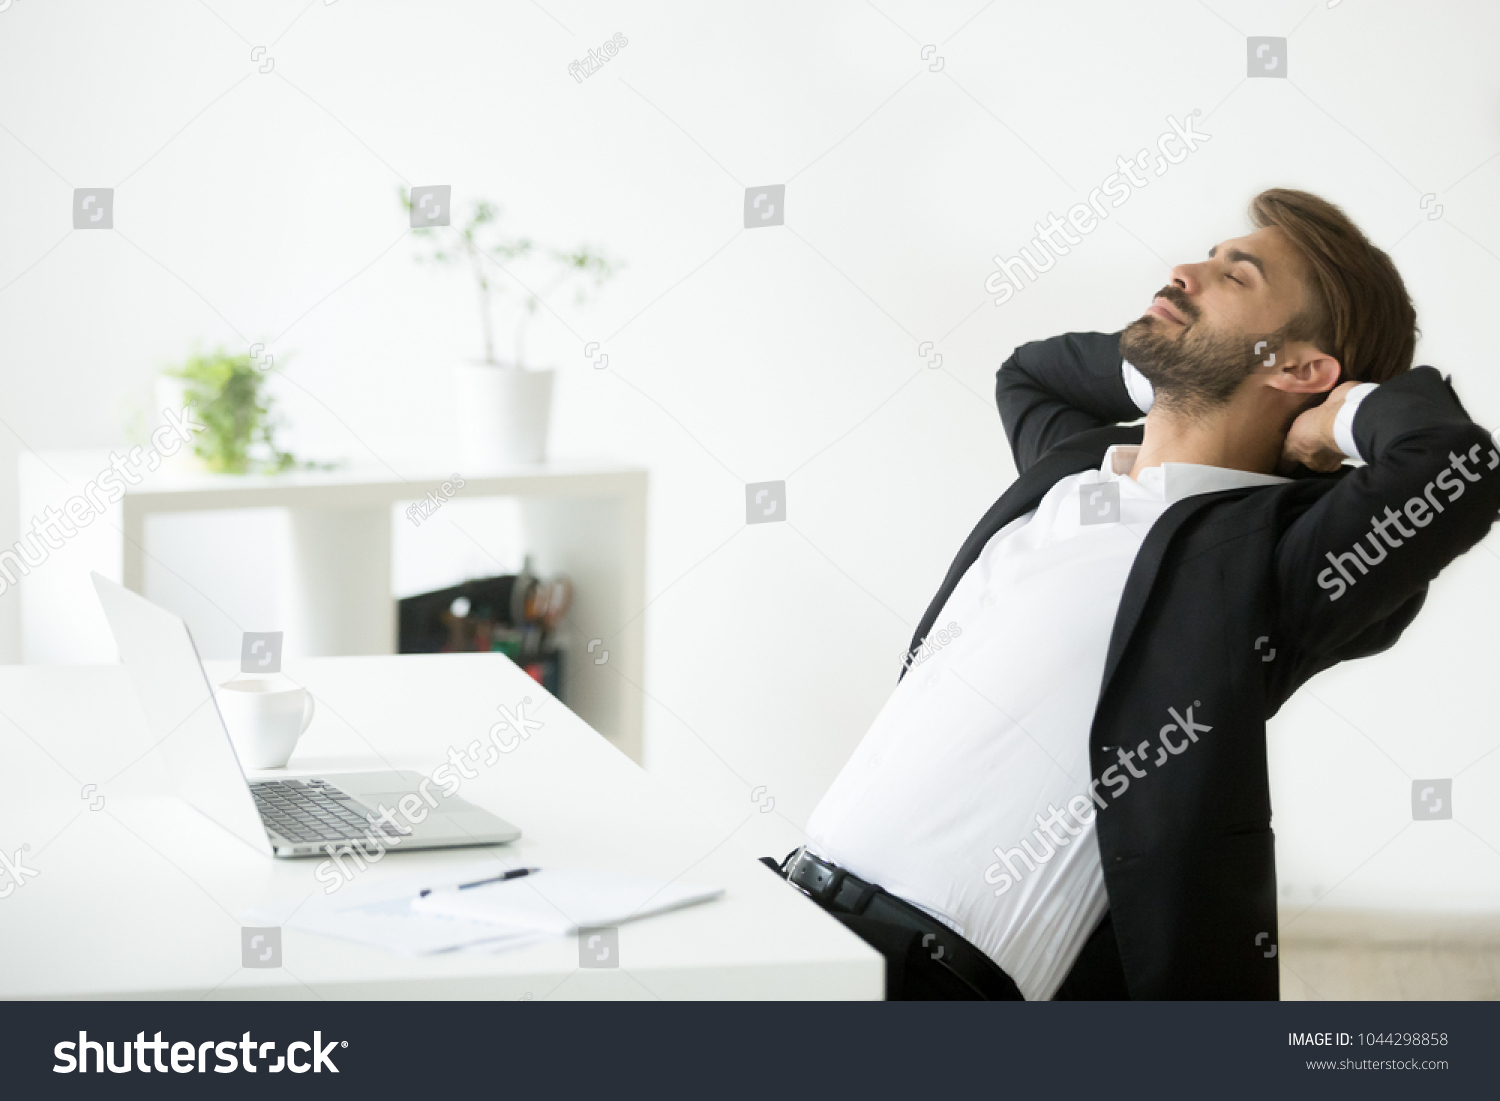 Successful young businessman in suit relaxing at workplace with laptop finished work, relaxed calm employee feels happy breathing fresh air, smiling ceo enjoys break in office, no stress free relief #1044298858